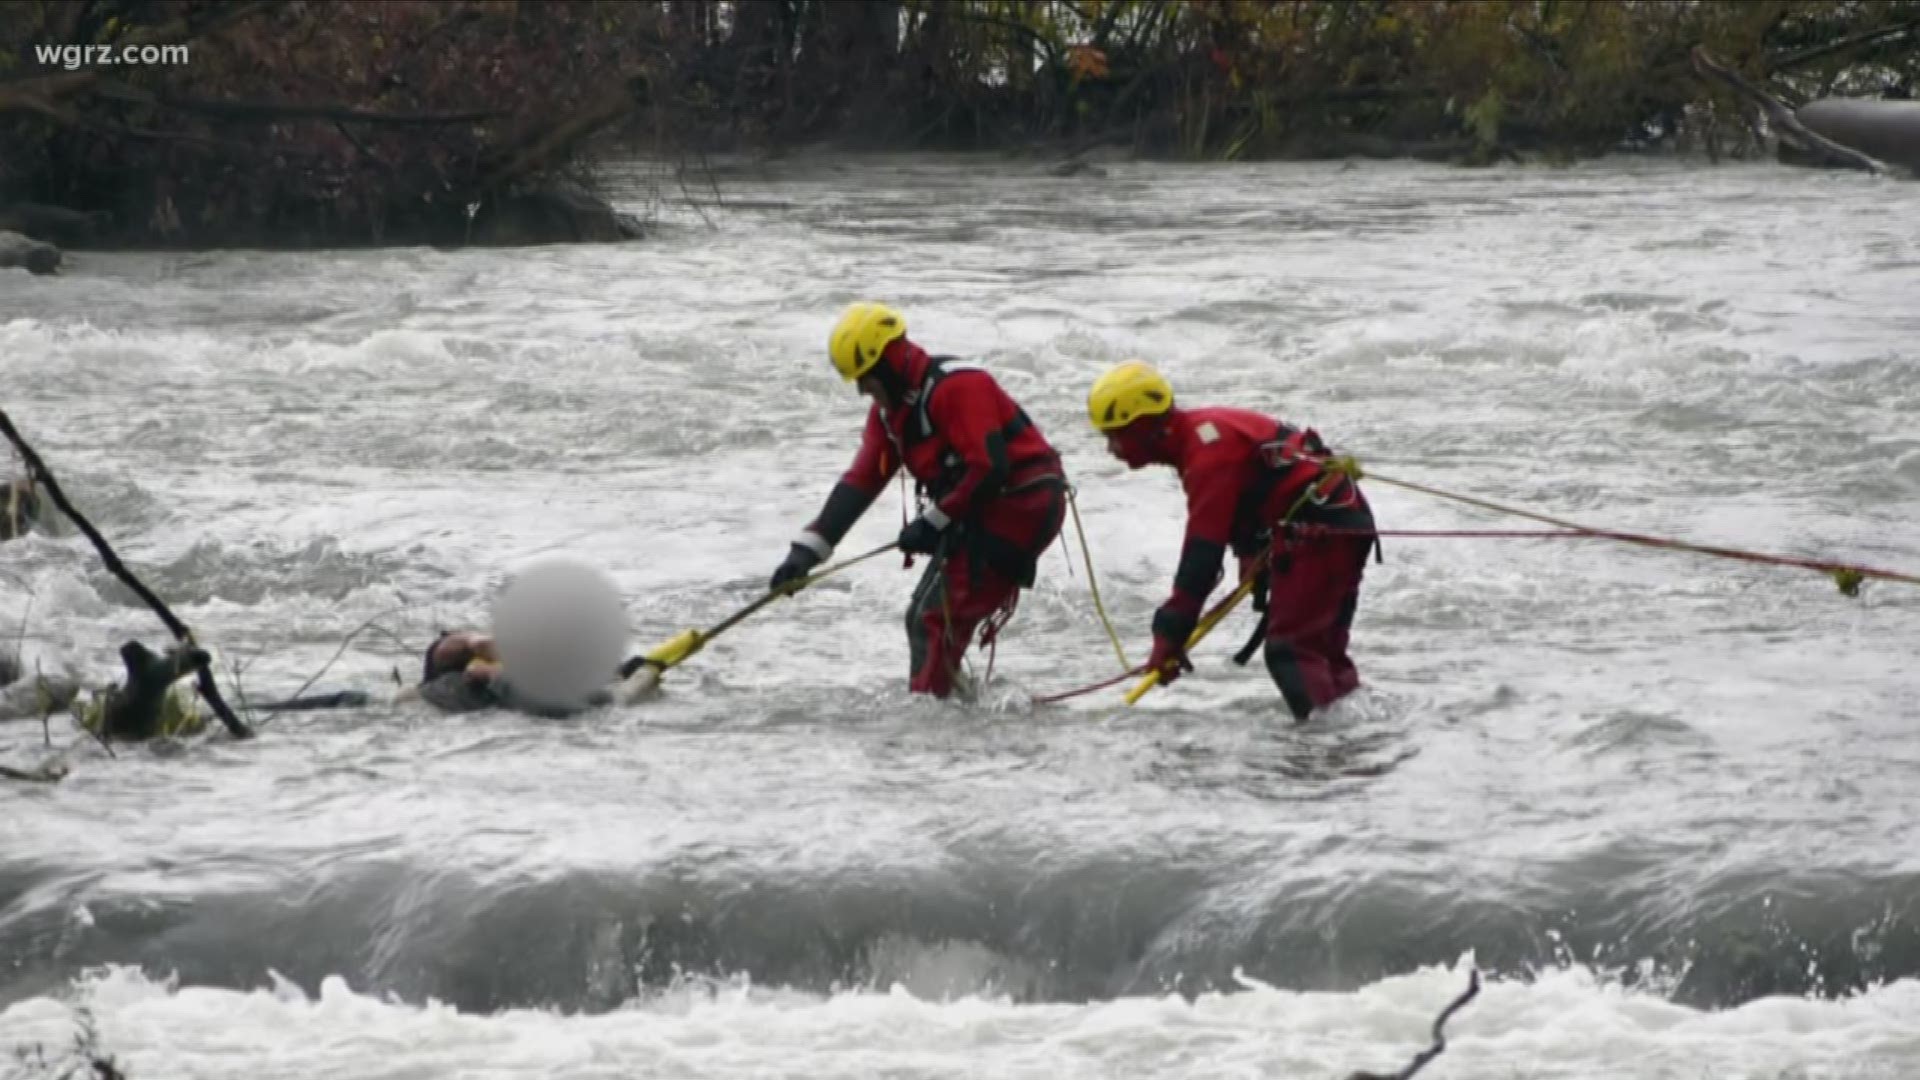 Man rescued from raging Niagara river